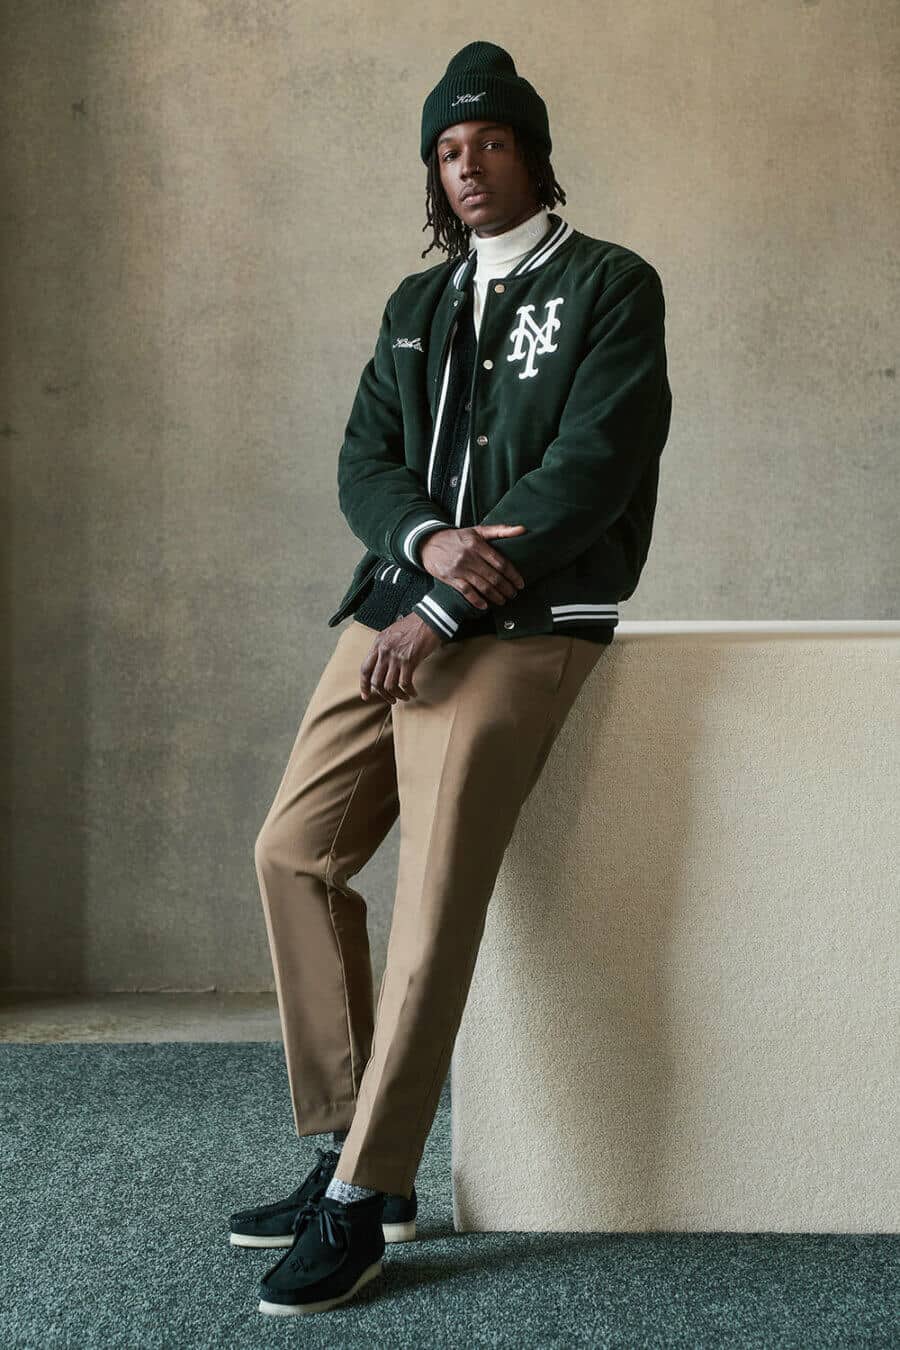 Men's tailored khaki pants, white turtleneck, green varsity jacket, beanie and suede Wallabee boots outfit